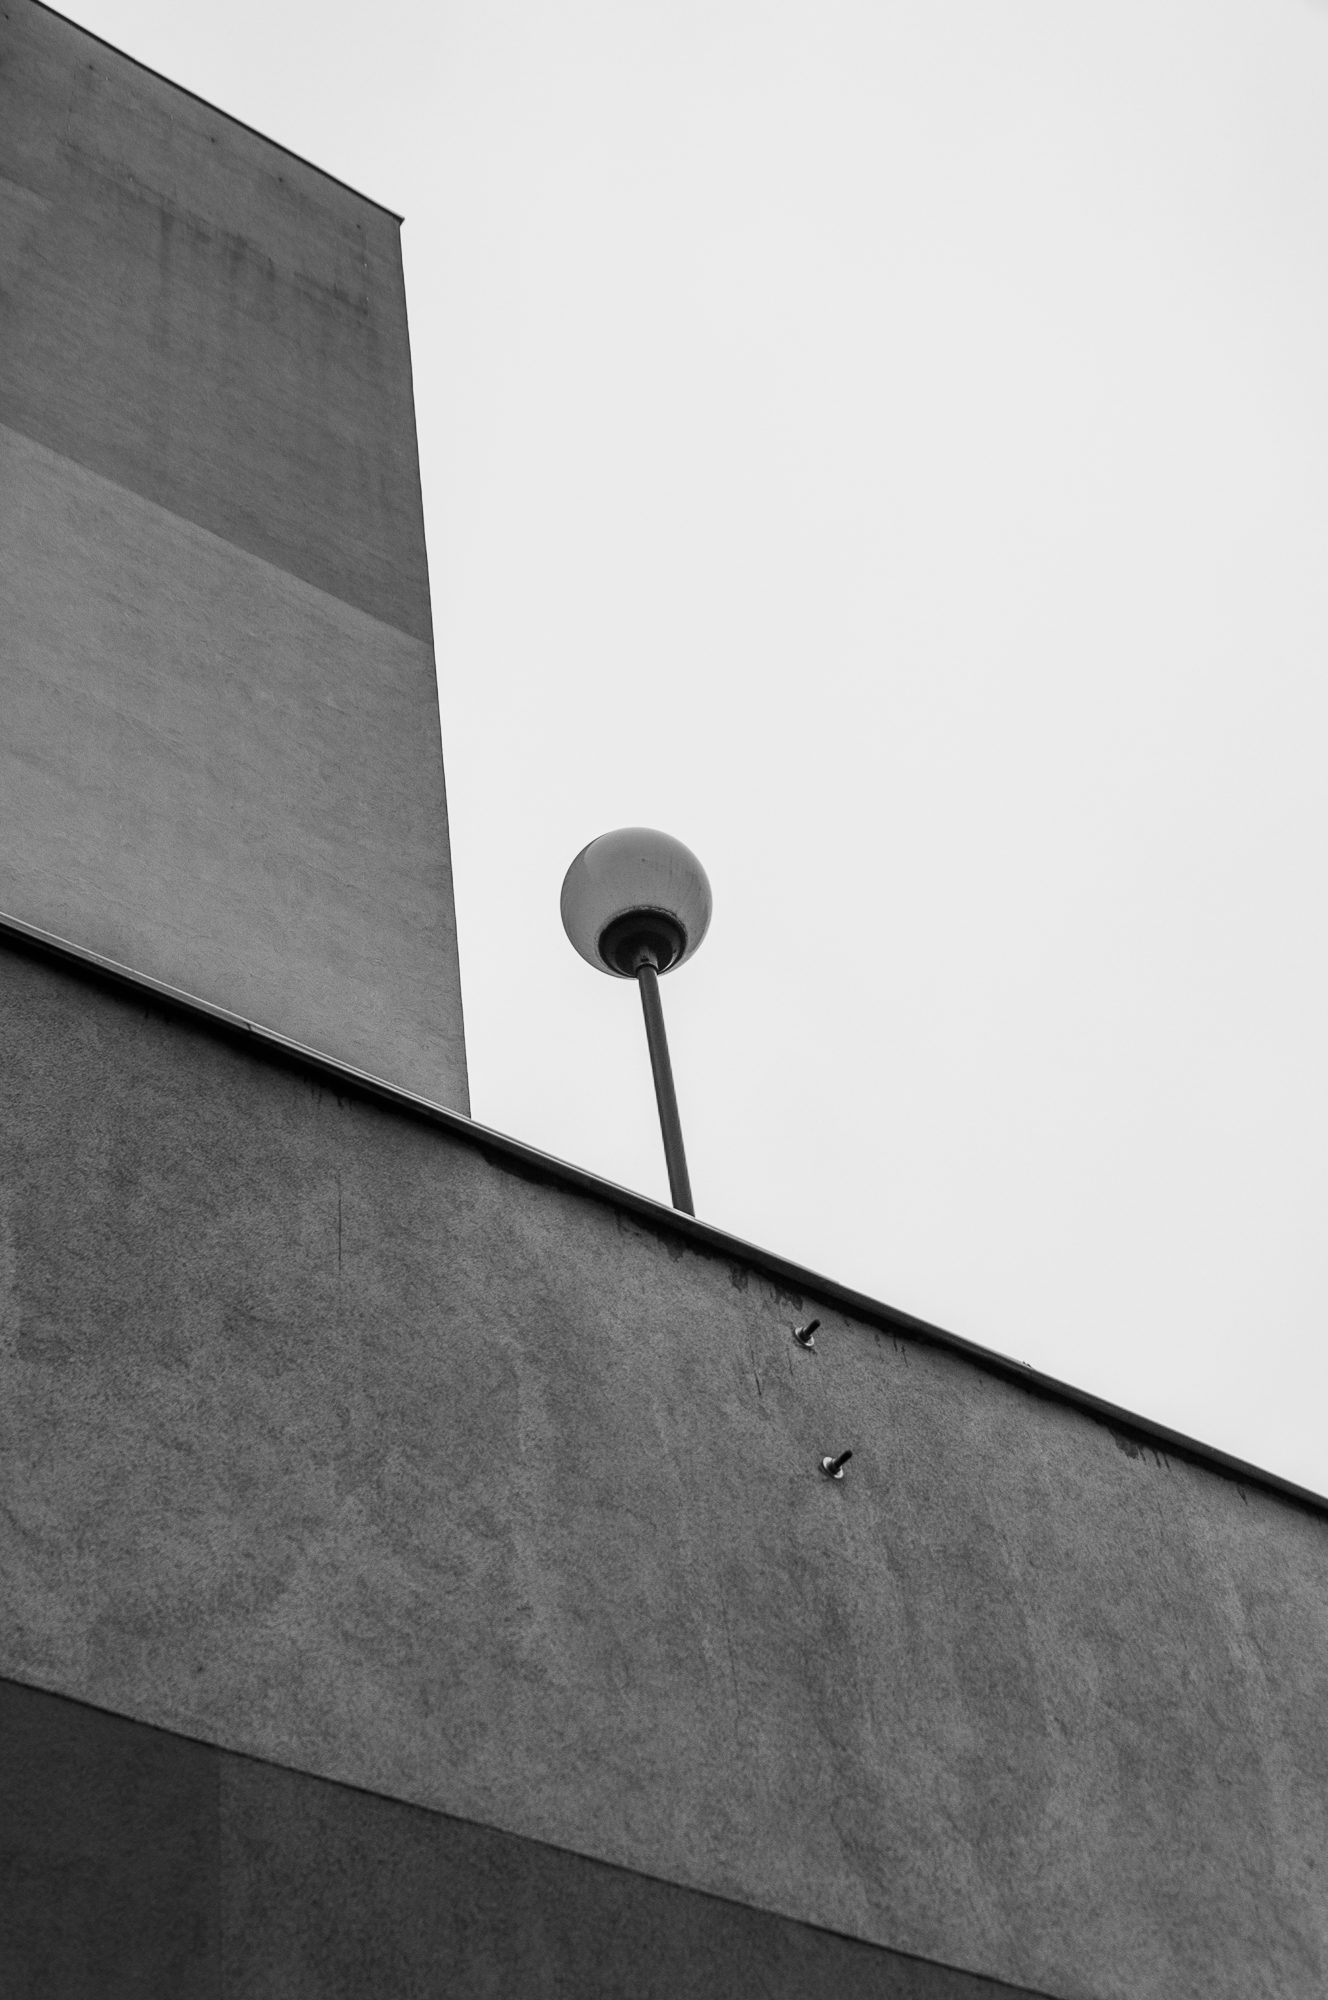 Adam Mazek Photography 2020. Warsaw Street Photography. Post: "The less time I have to write, the more efficient I am." Minimalism.